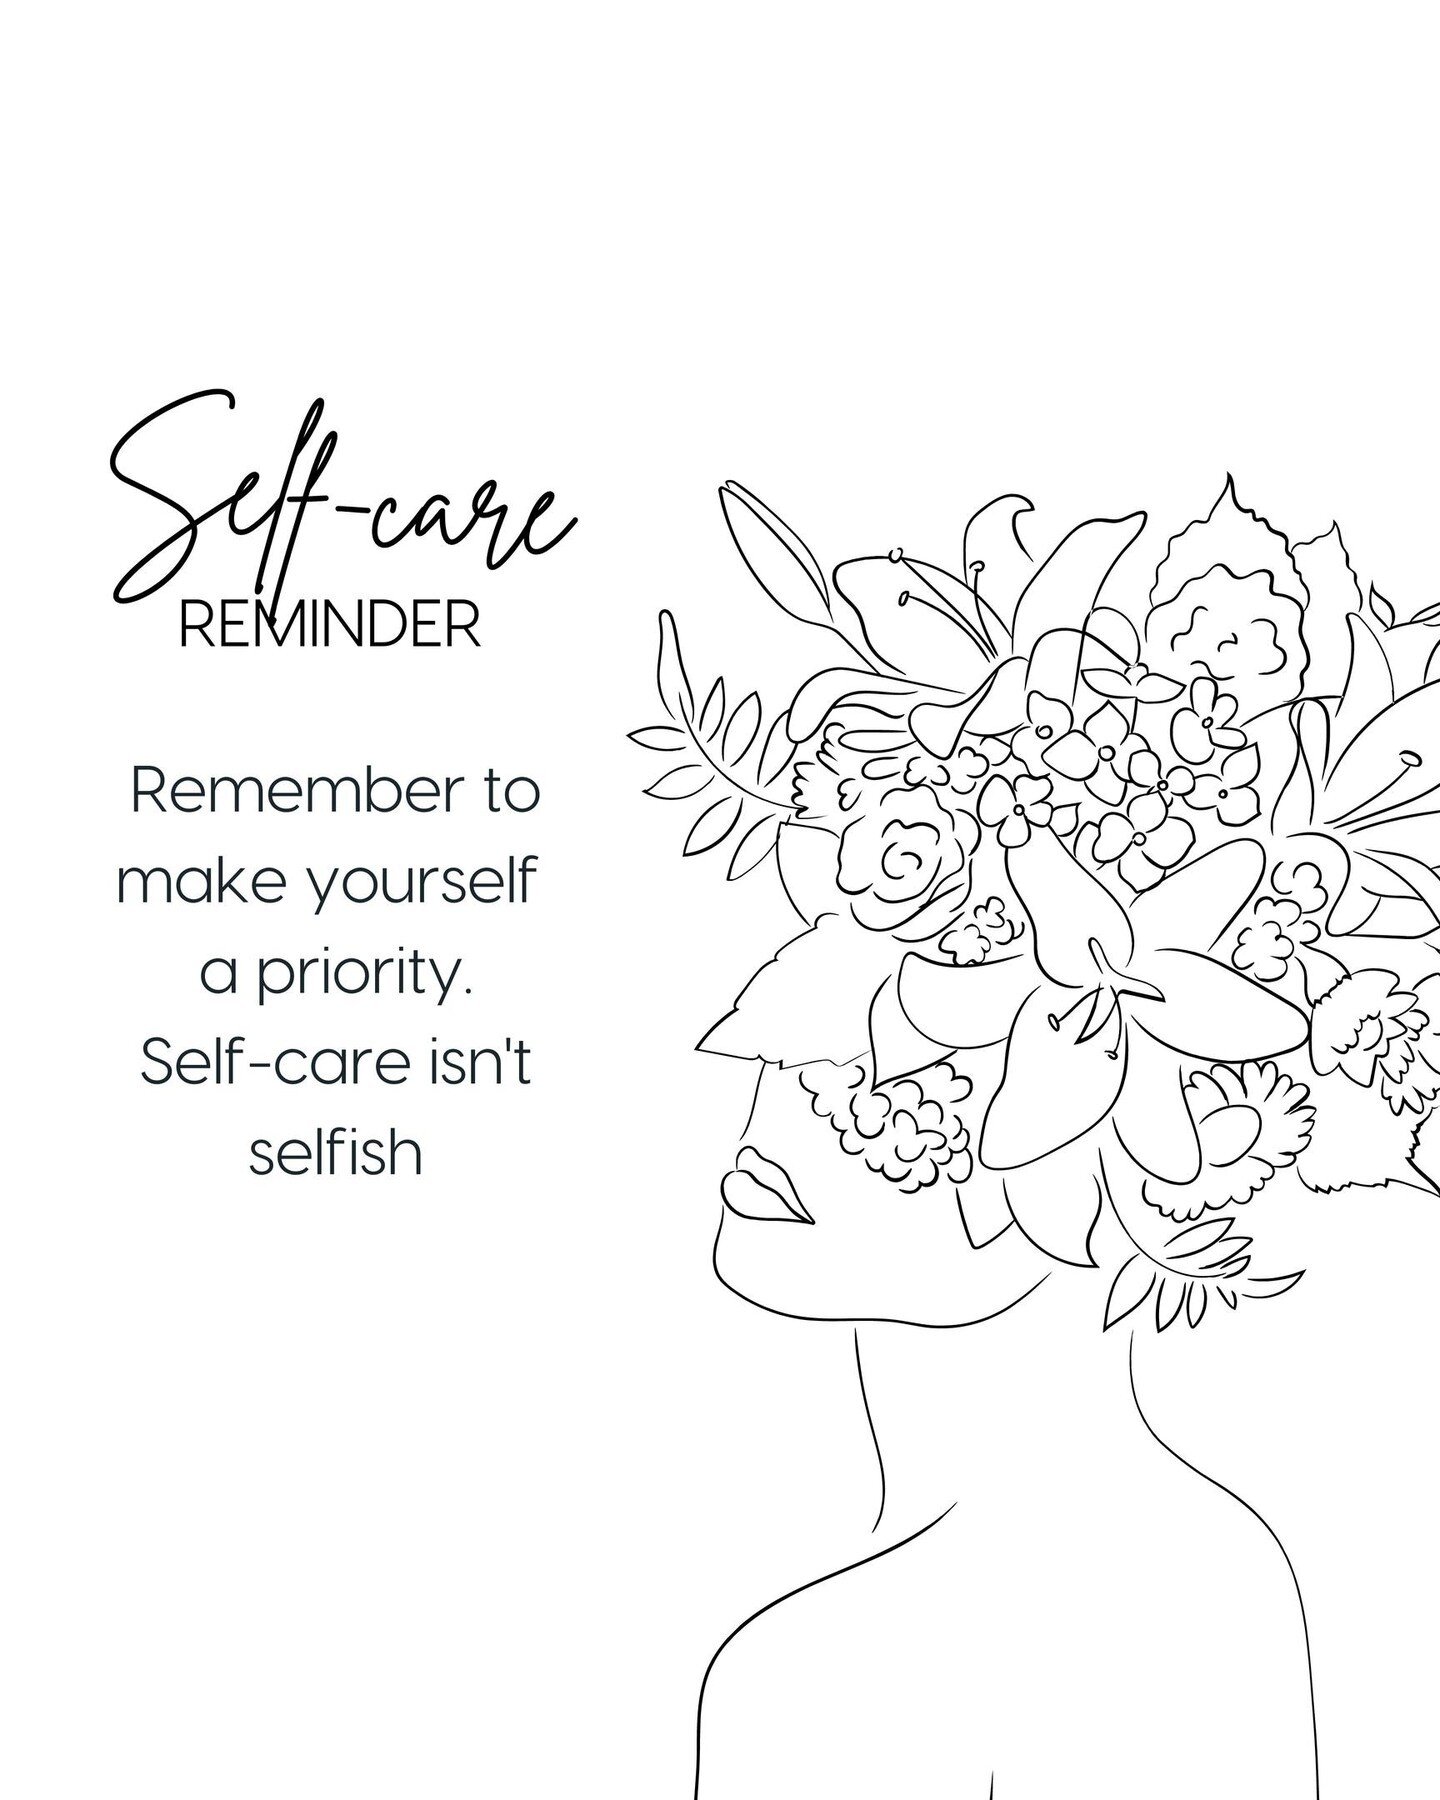 It's so easy to get caught up in the hustle and bustle of everyday life that you can forget to make yourself a priority. But self-care isn't selfish&mdash;it's actually something you need to do for your own well-being, and it will benefit everyone ar